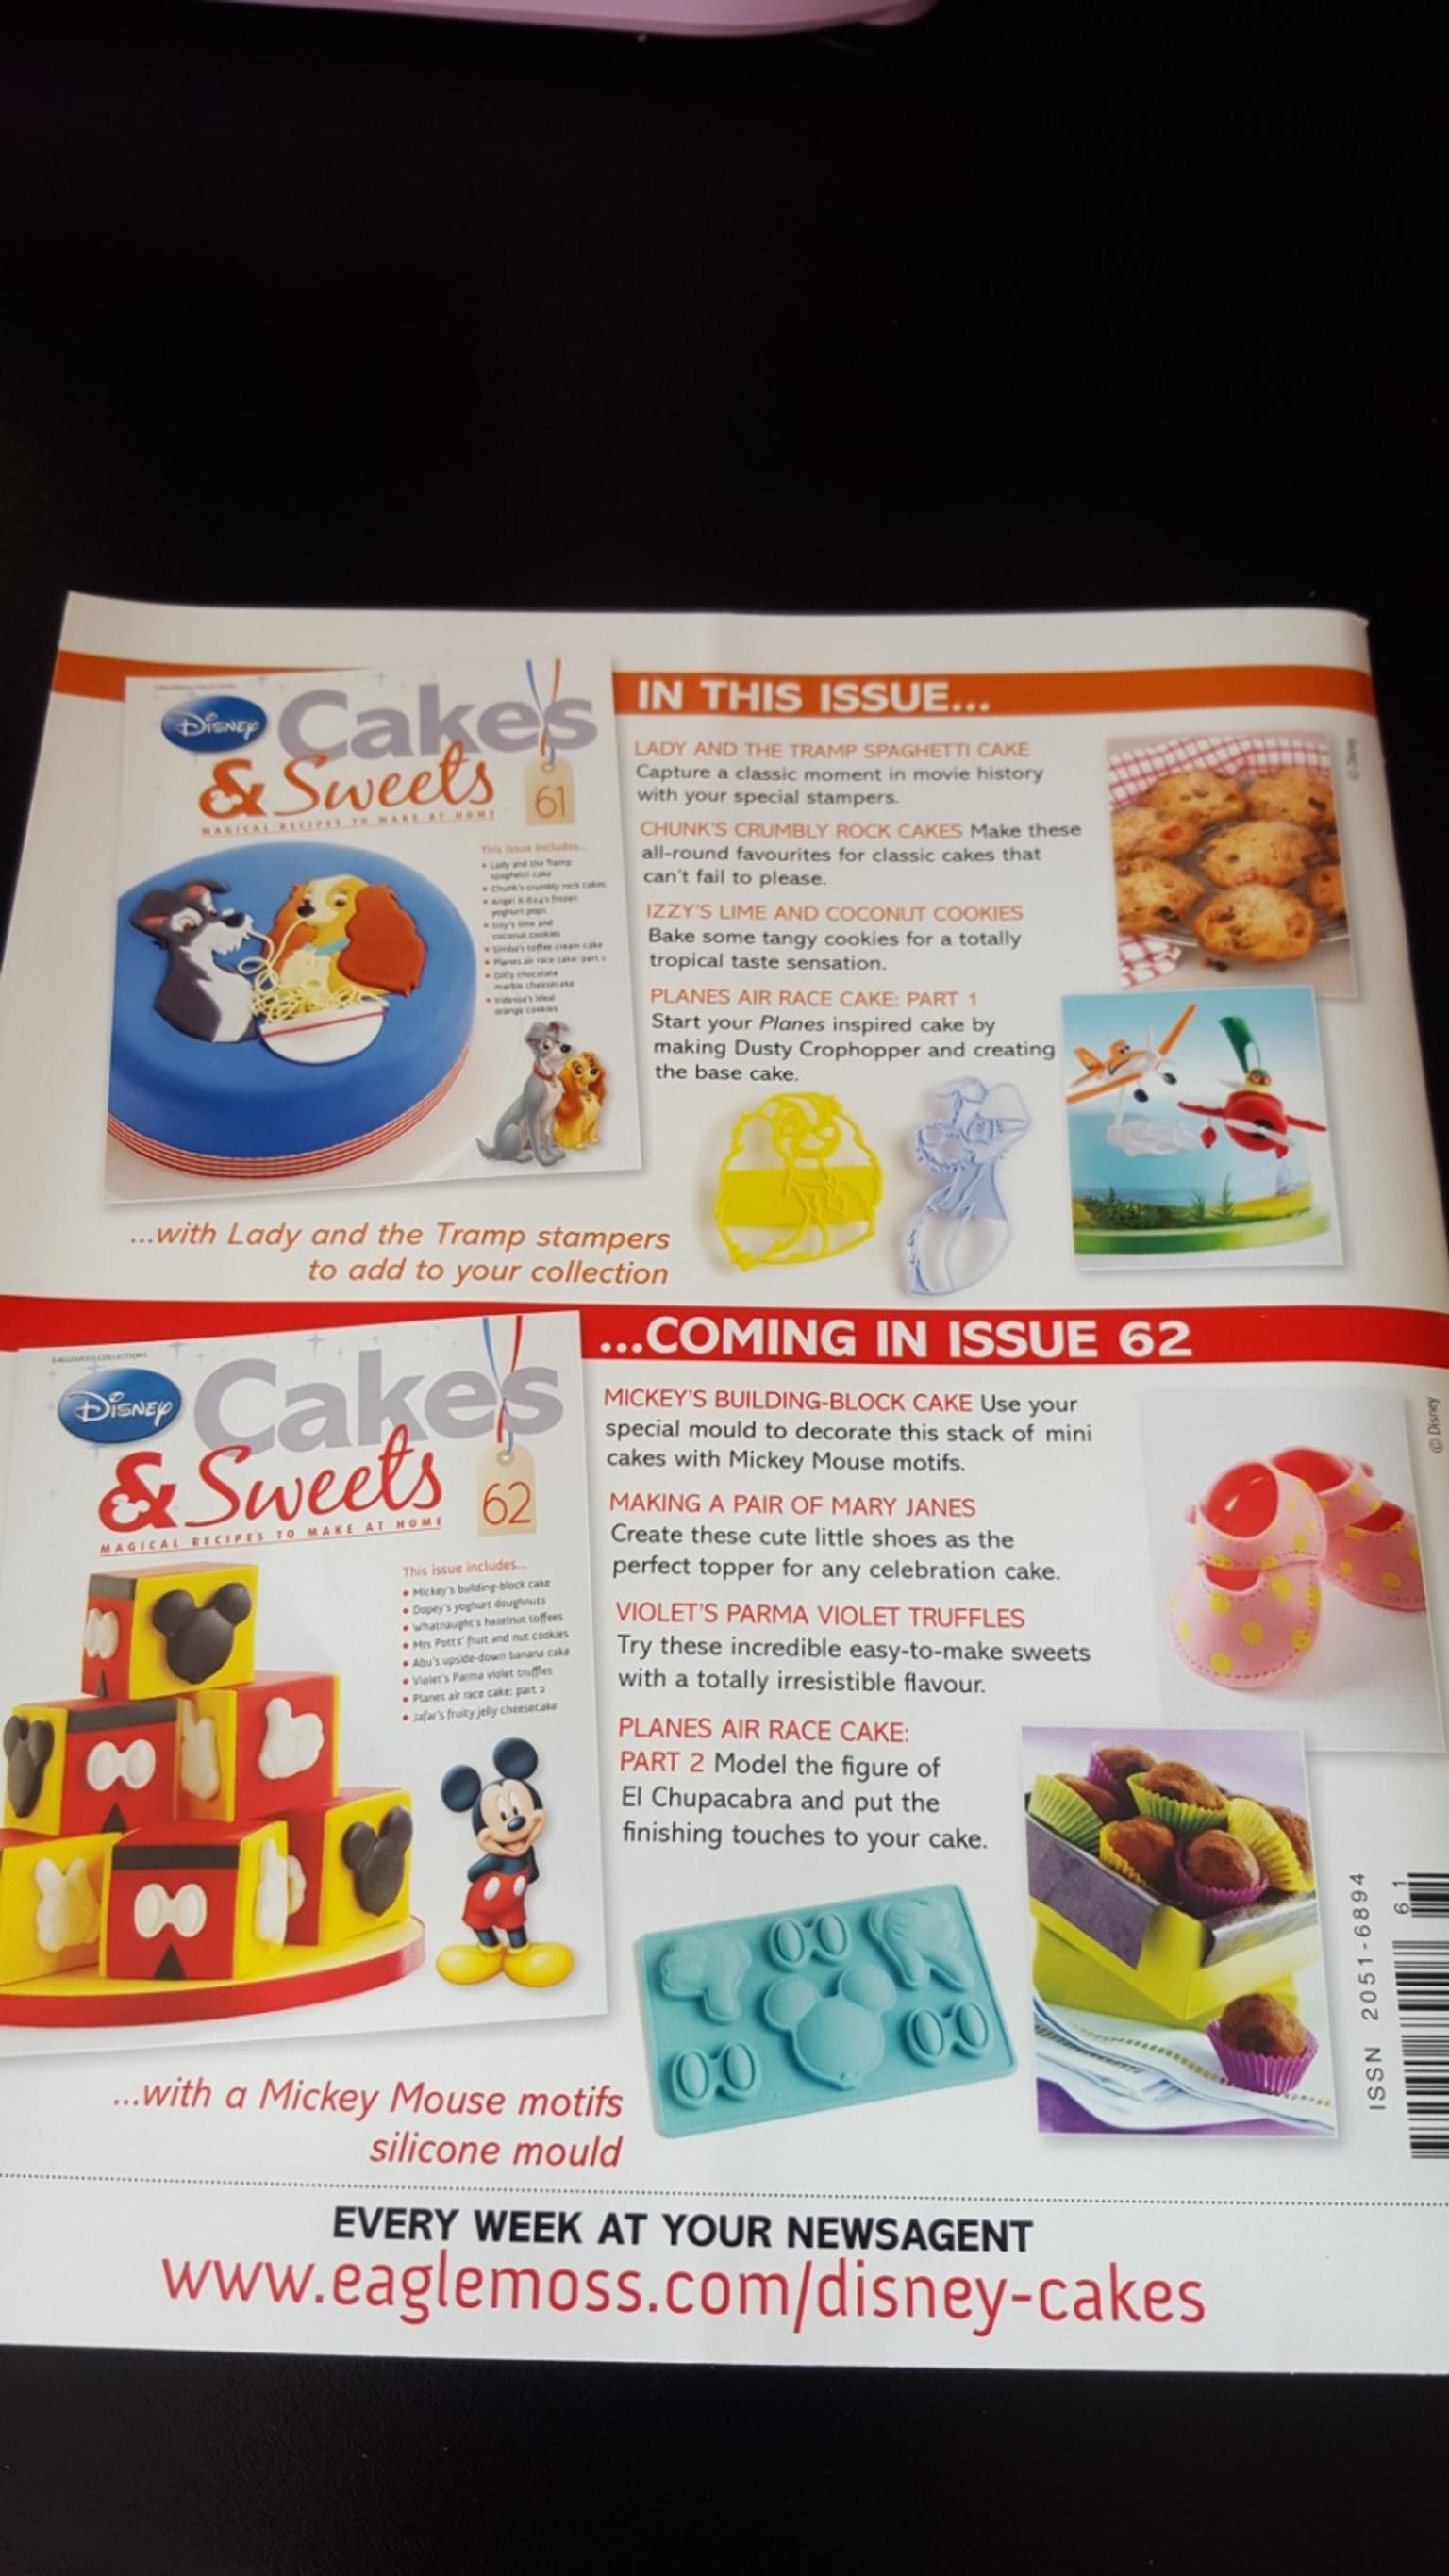 EAGLEMOSS DISNEY CAKES & SWEETS  MIKEY MOUSE MOTIFS SILICONE MOULD No 62  NEW